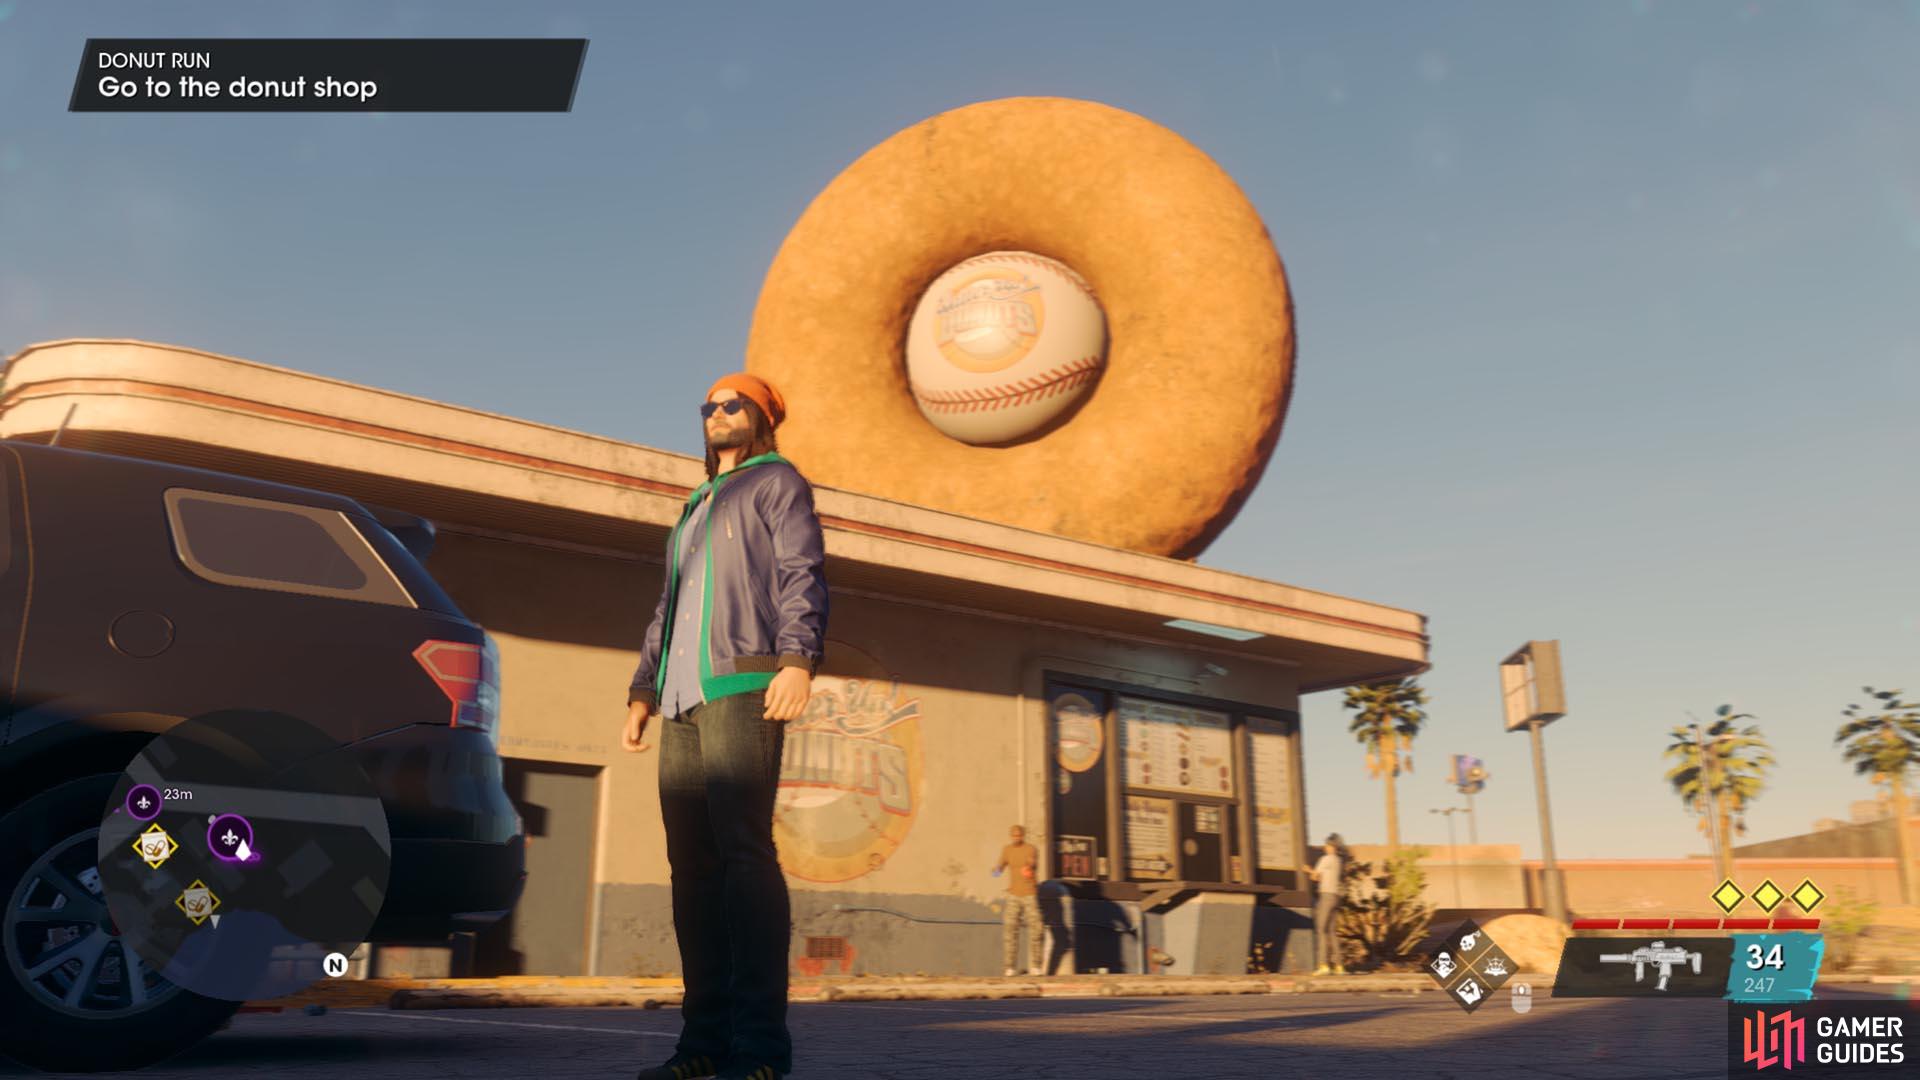 You need to grab some tasty donuts for the gang. Why is life not that simple when you are a Saint?